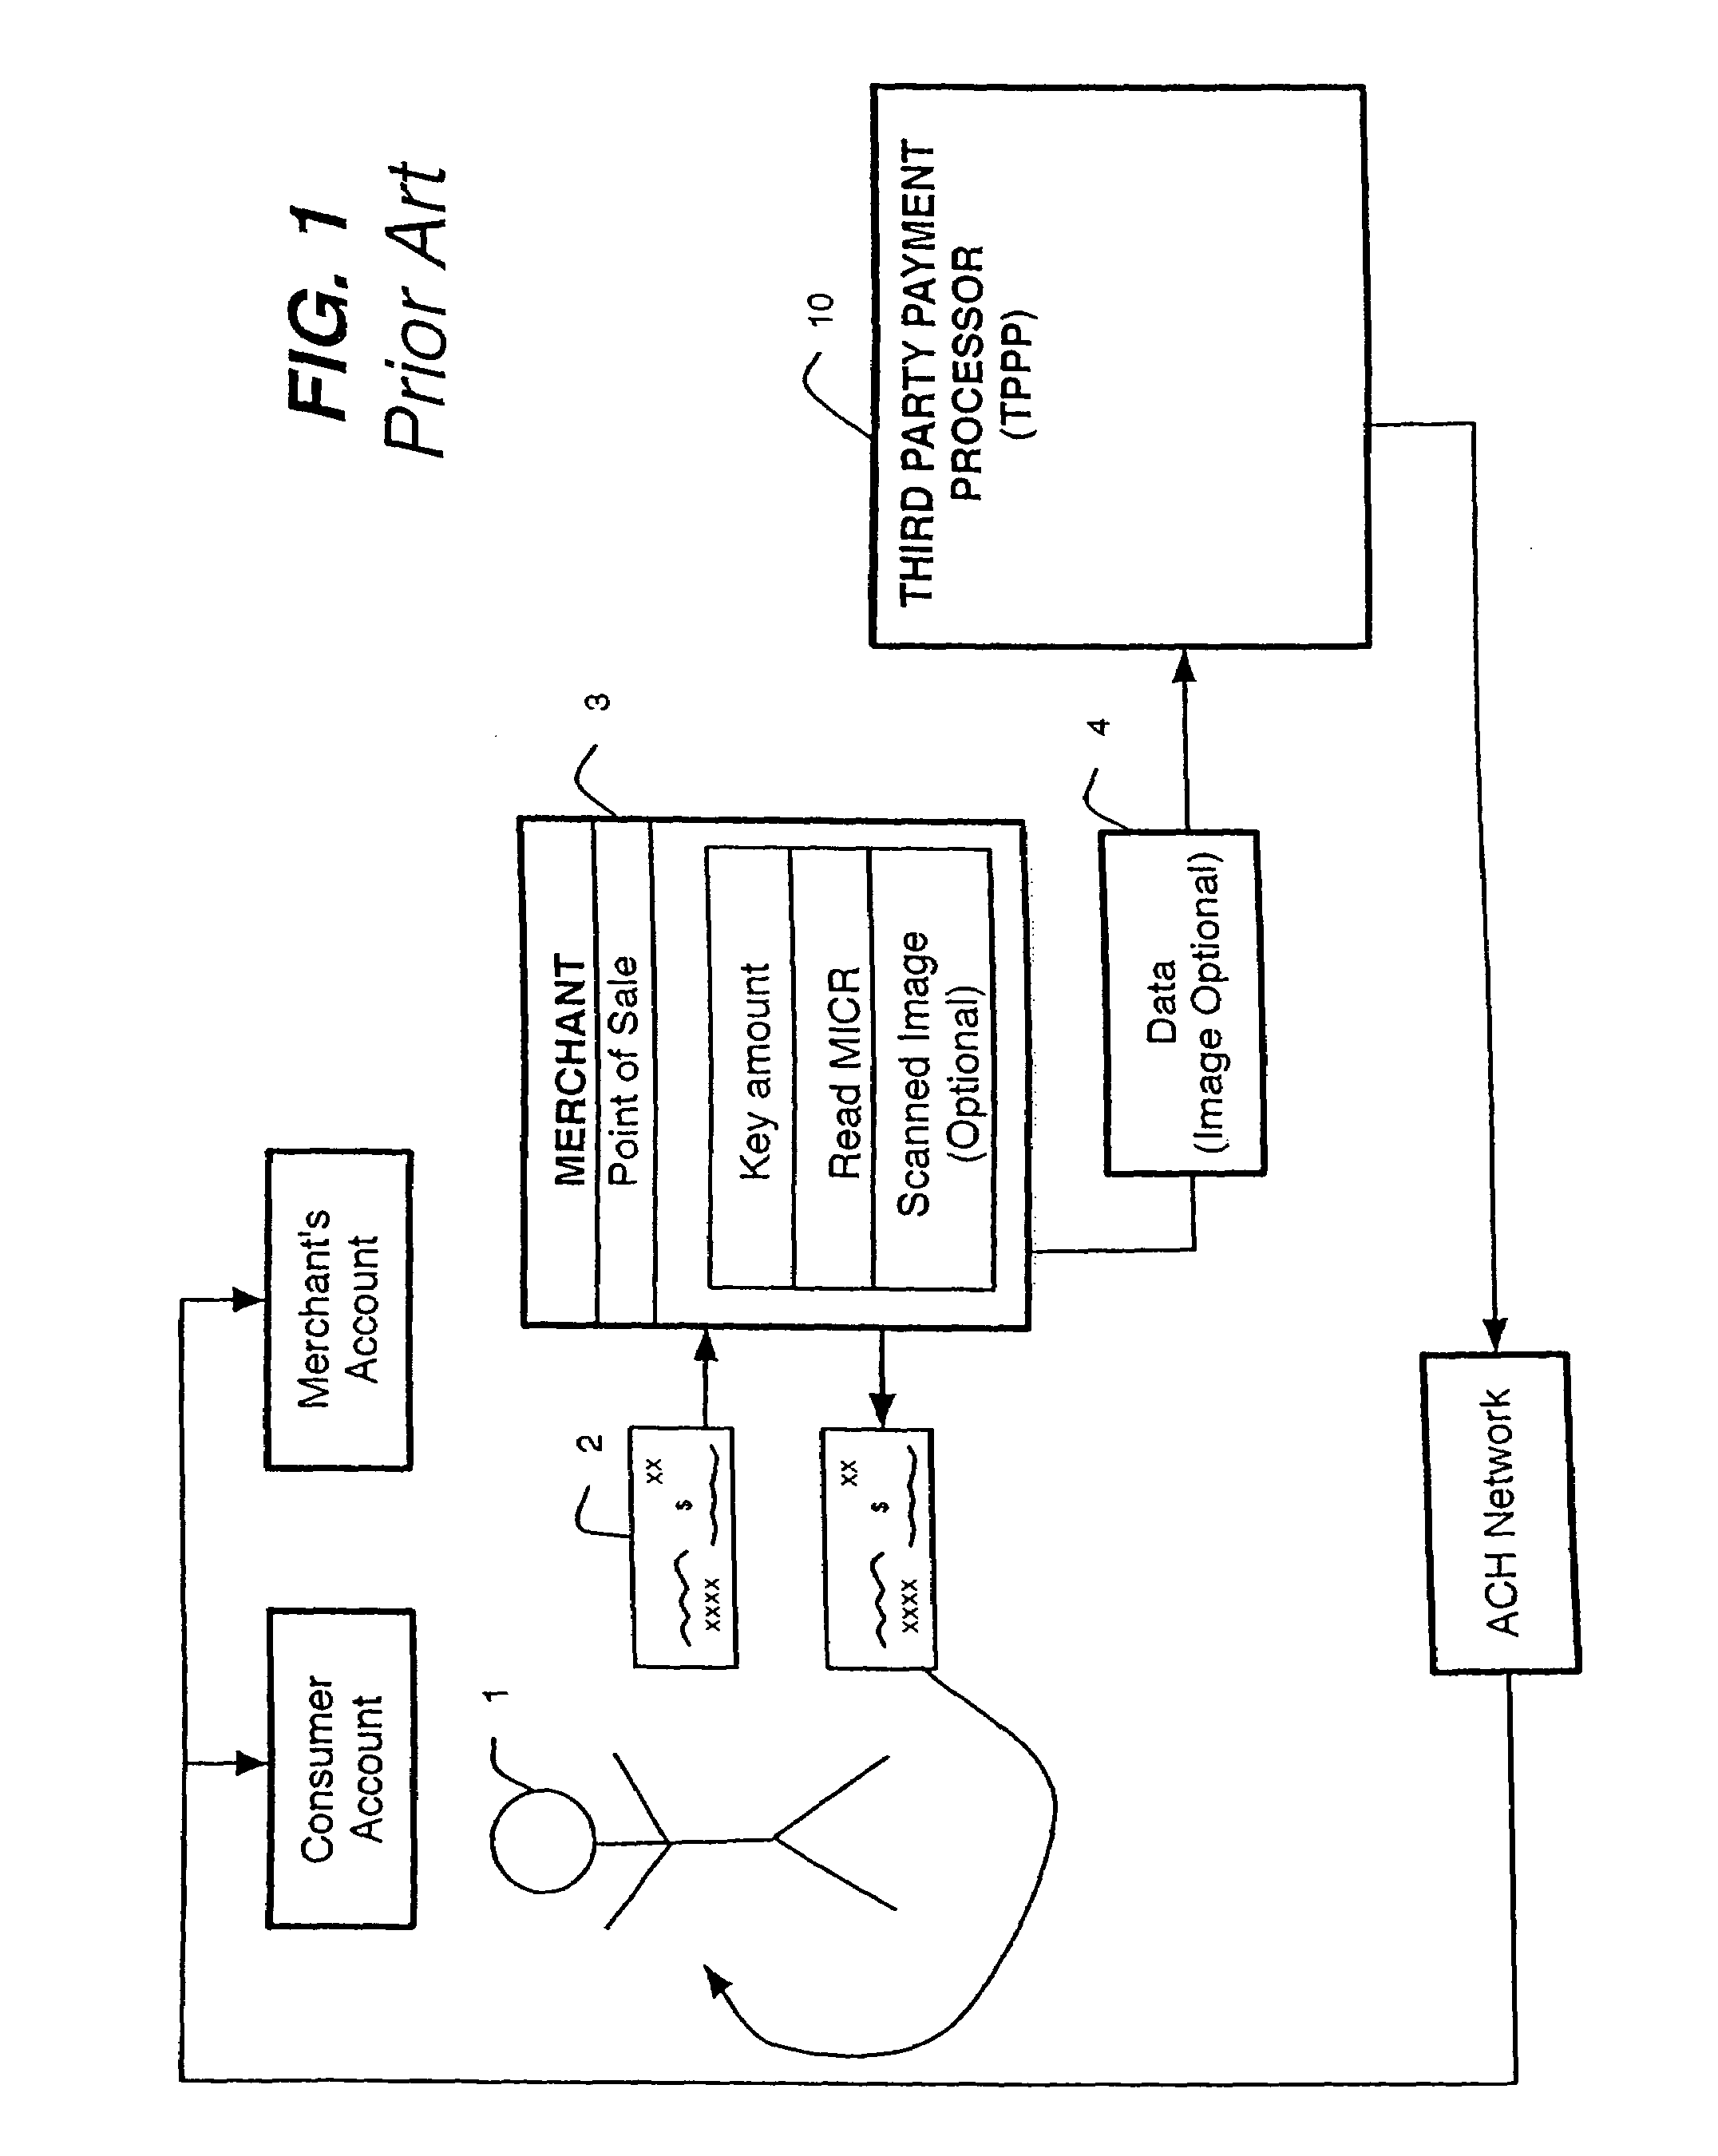 System and method for processing checks and check transactions with thresholds for adjustments to ACH transactions